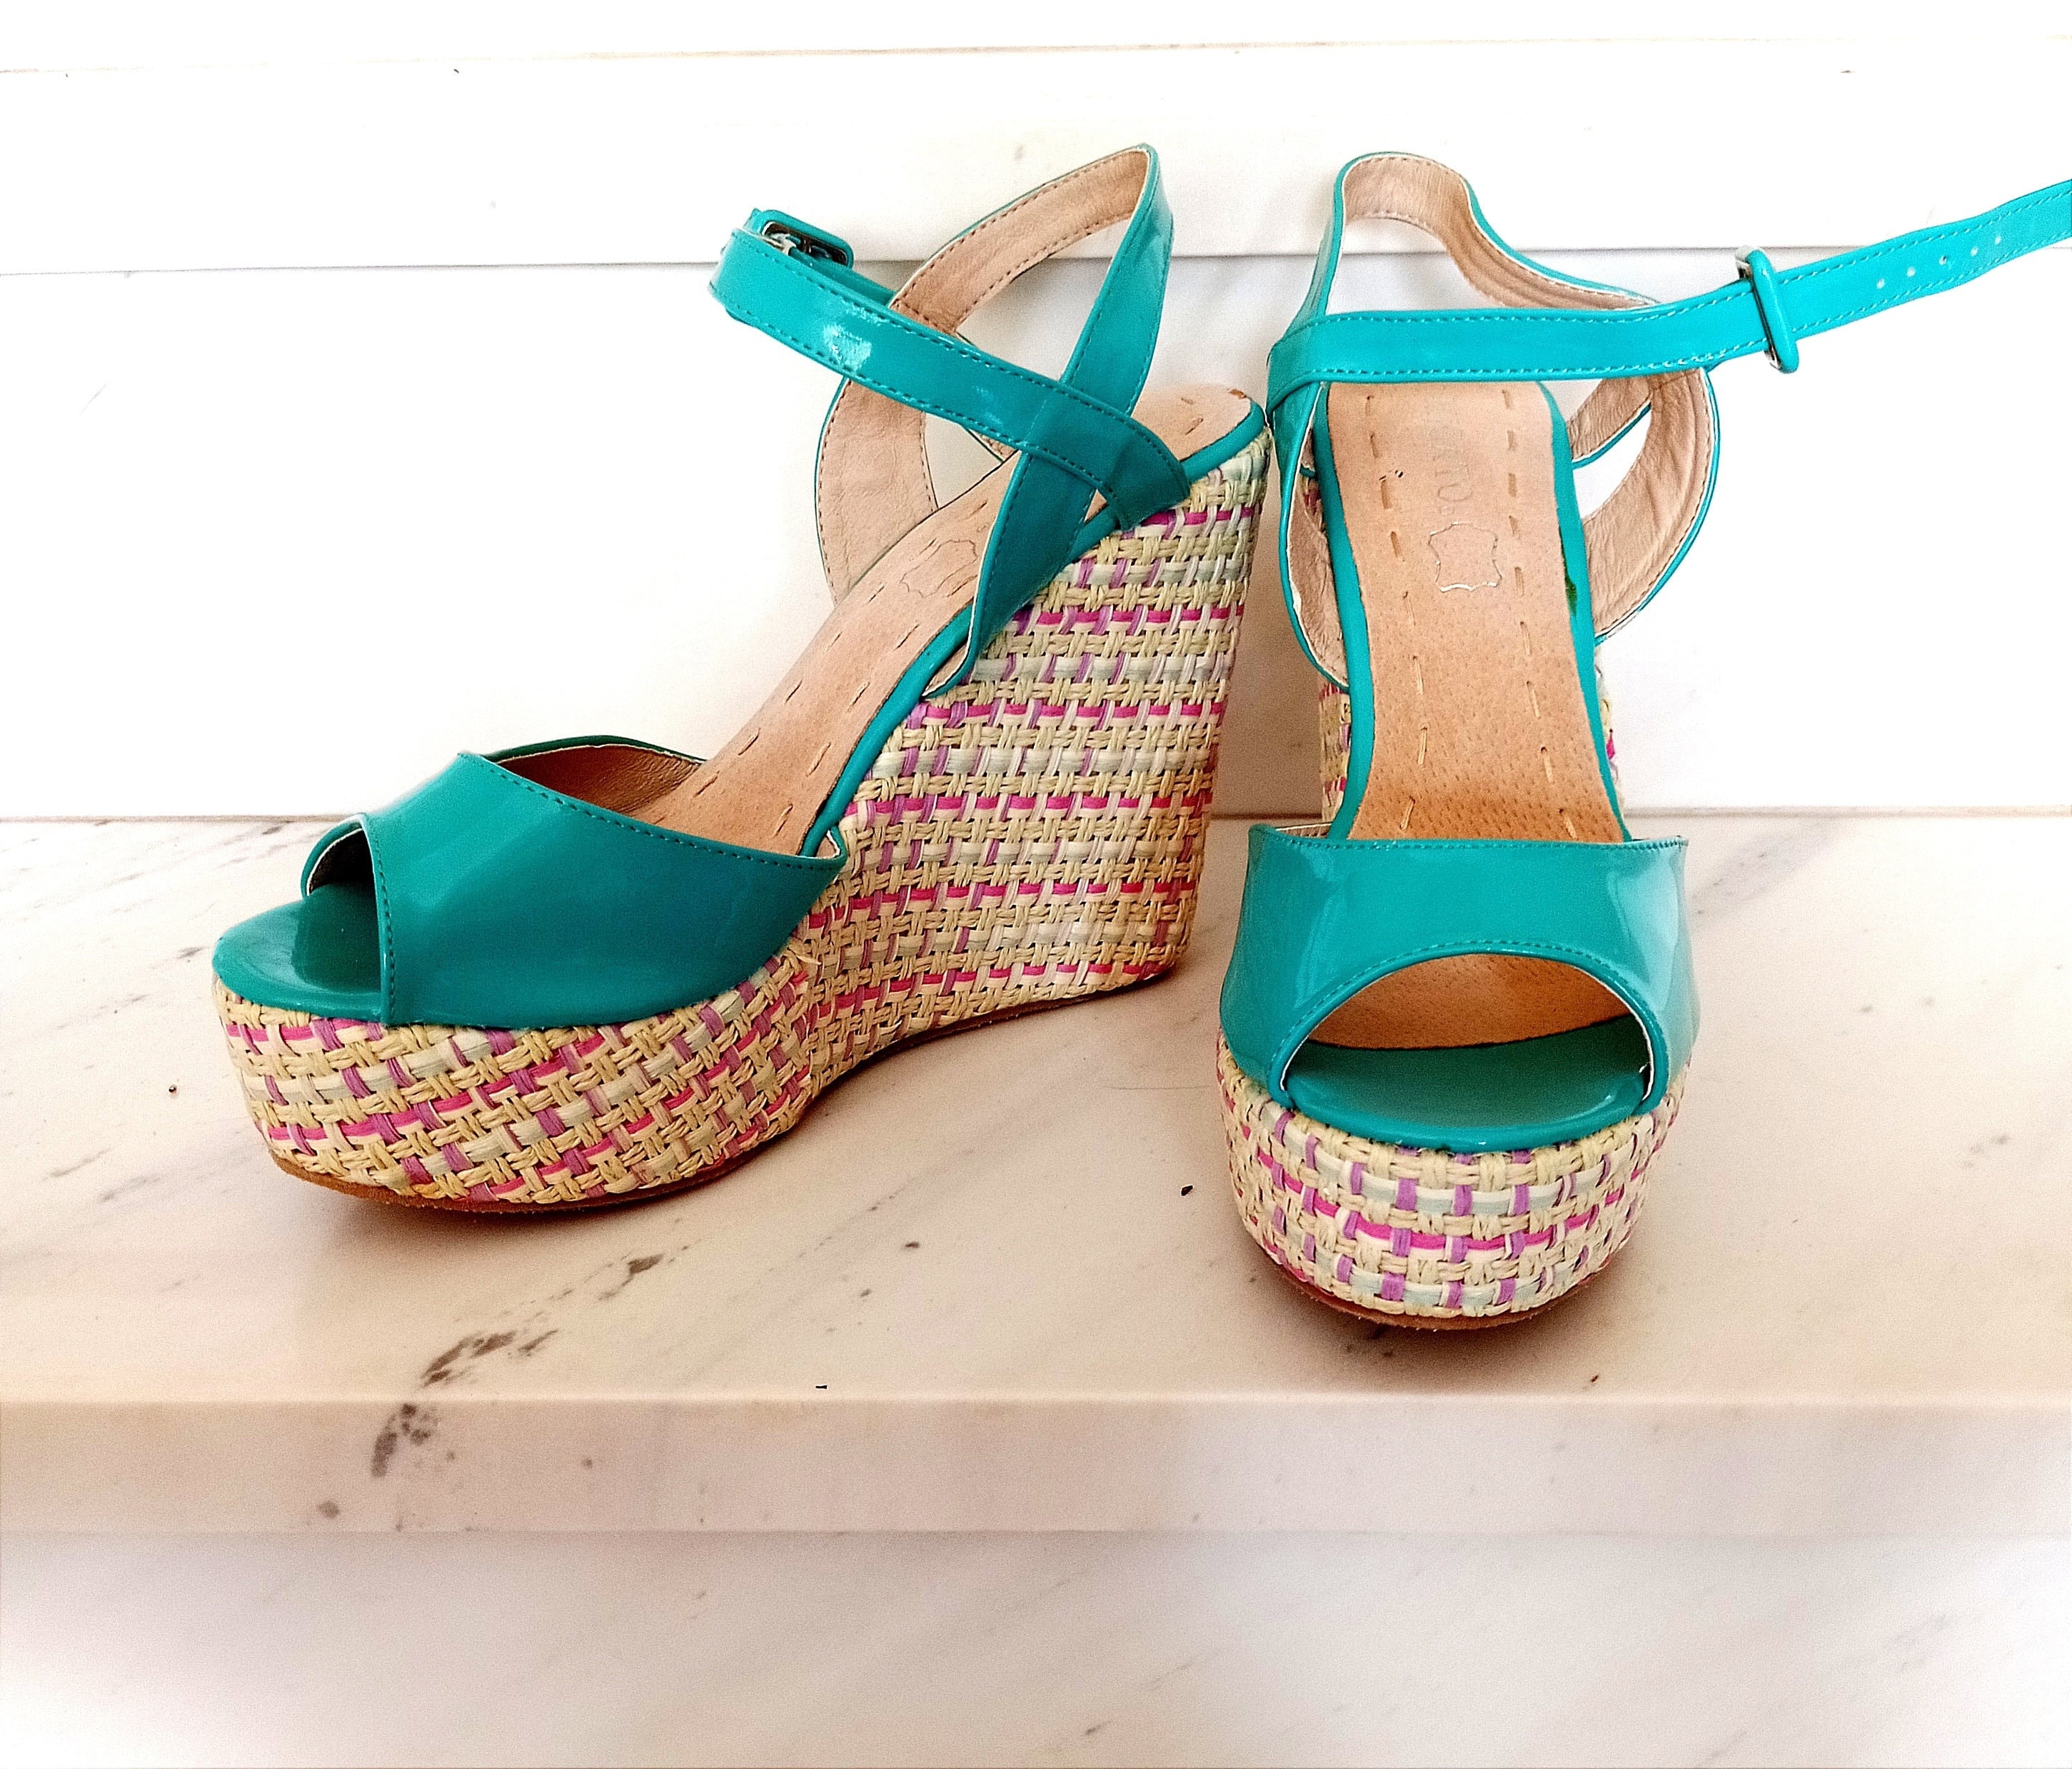 Ultra High Turquoise Platform Sandals Colourful Straw - Etsy